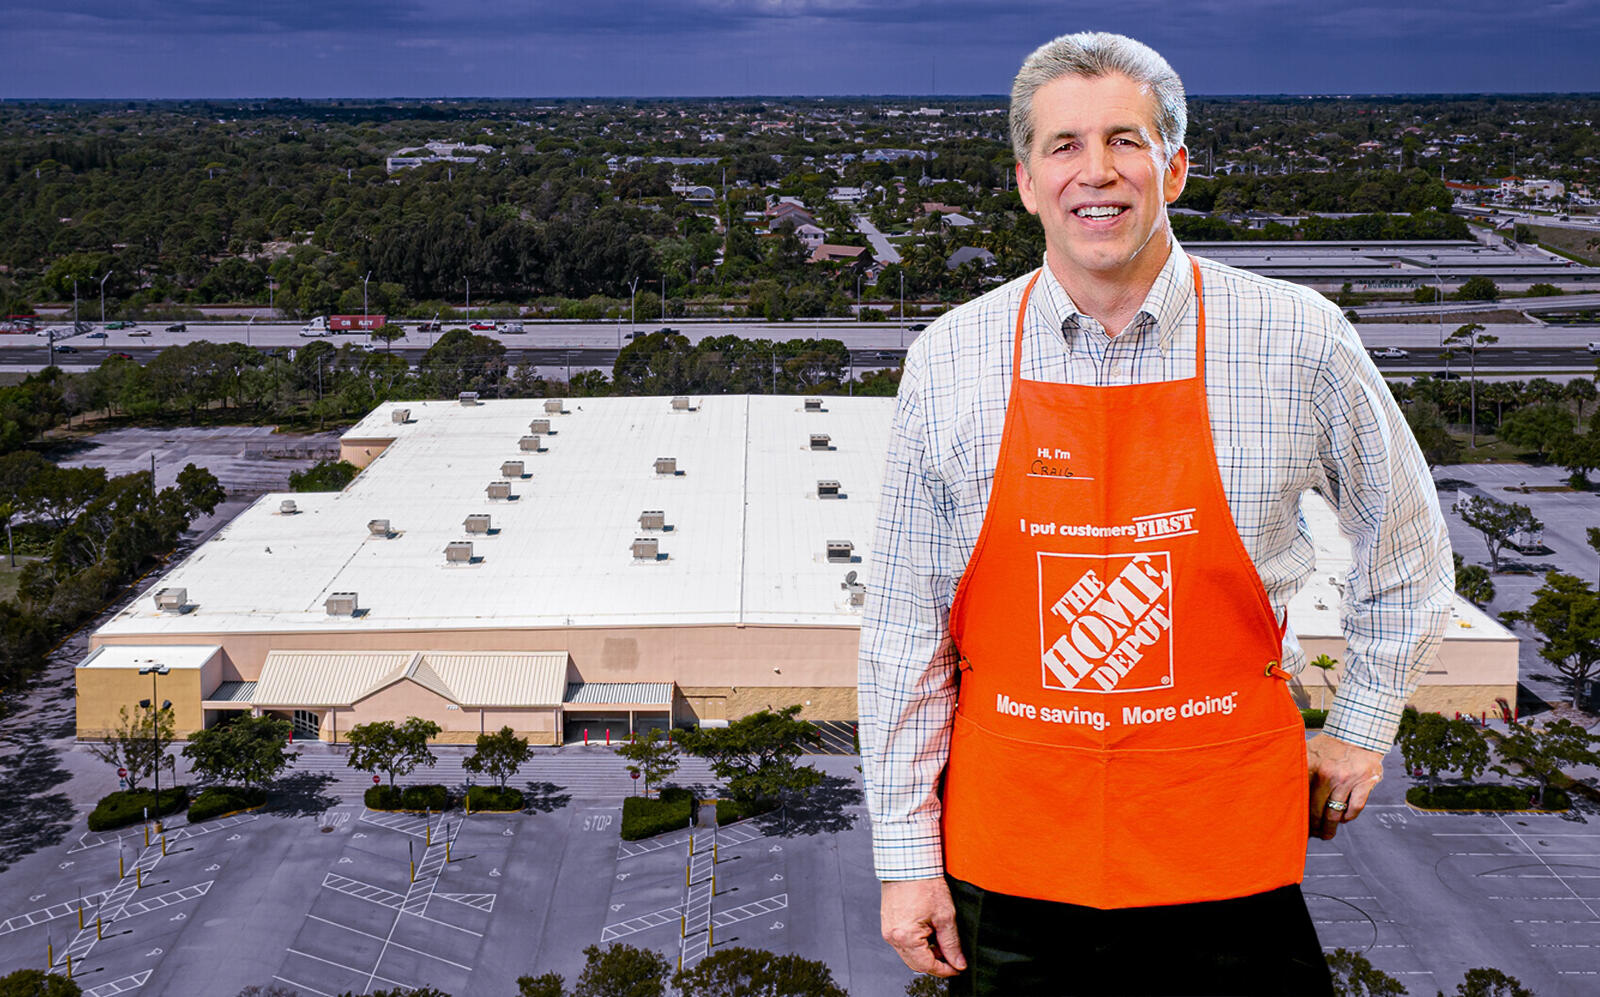 Home Depot CEO Craig Menear with the property (Home Depot, LoopNet)